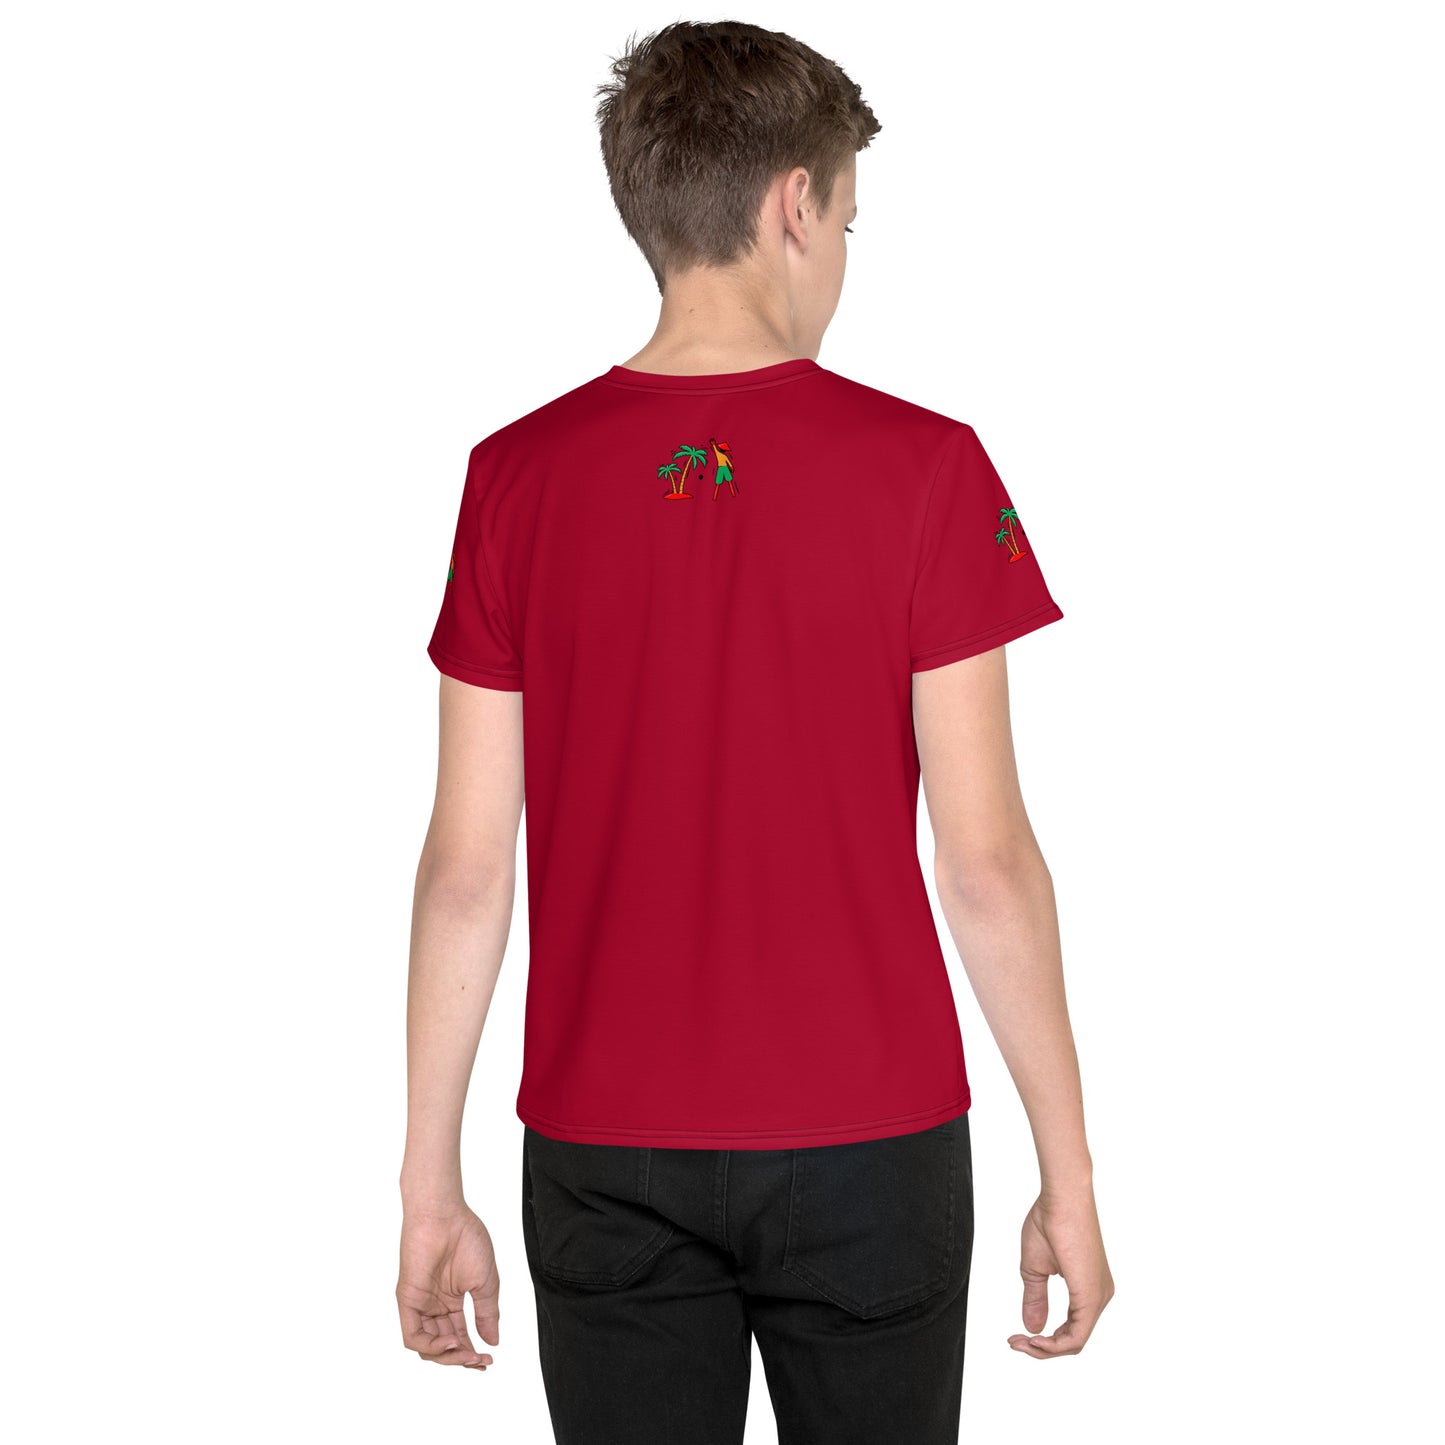 Maroon V.Localized (Ice/Gold/Green) Youth Dry-Fit T-Shirt